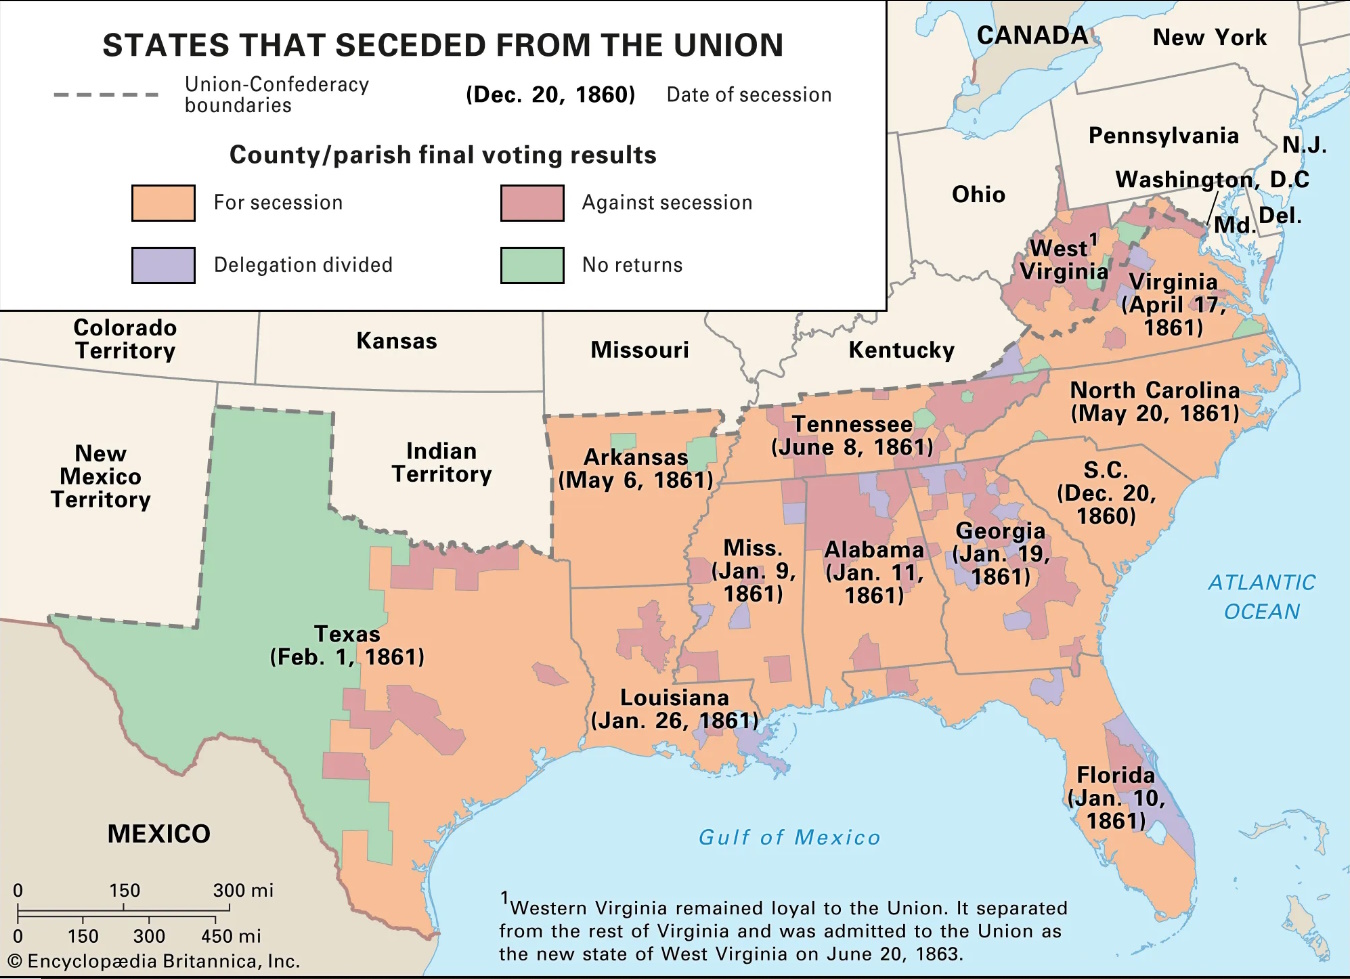 The States that seceded from the Union